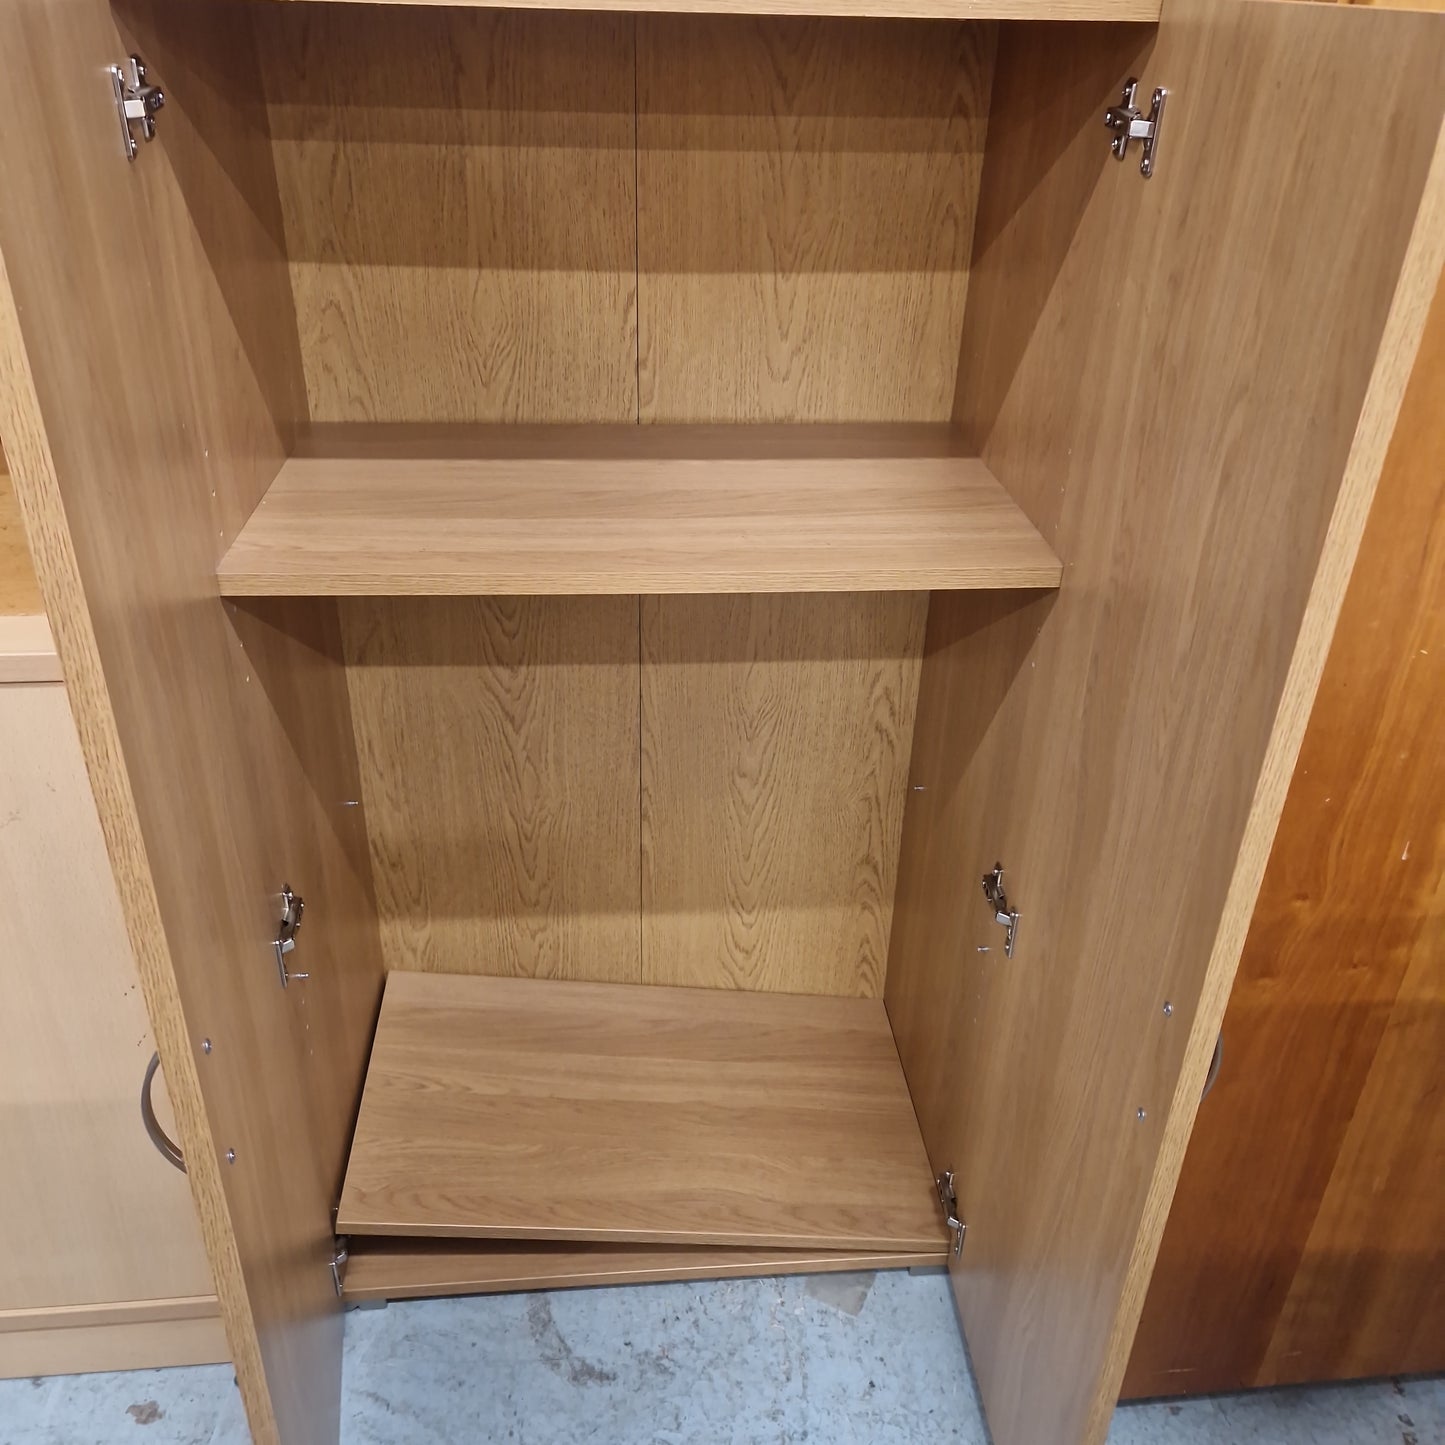 Contract bookcase 1230mm high with 2 shelves